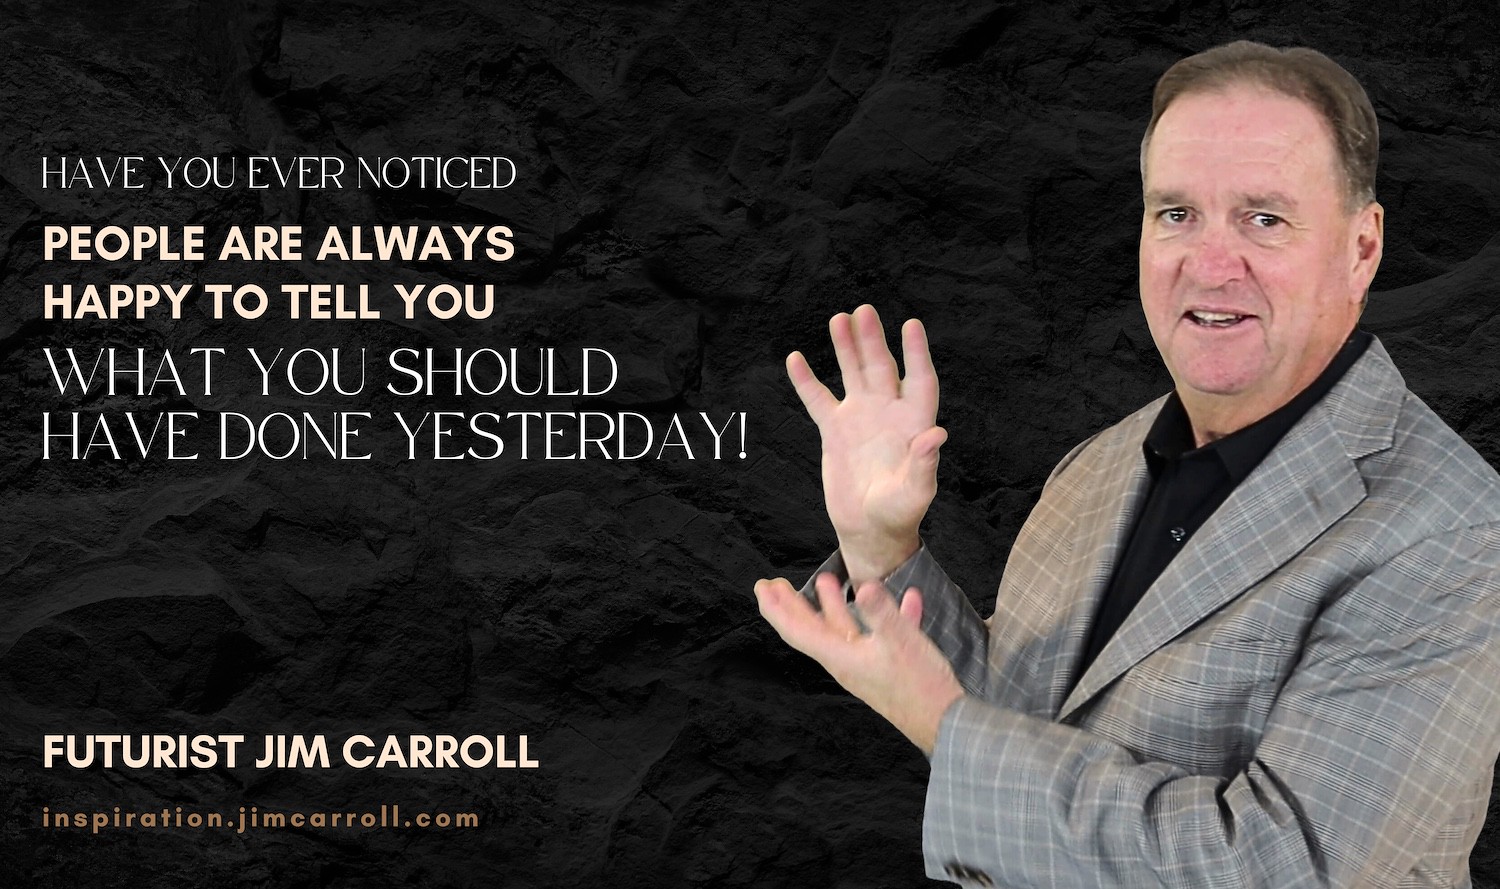 Daily Inspiration: "Have you ever noticed people are always happy to tell you what you should have done yesterday!" - Futurist Jim Carroll